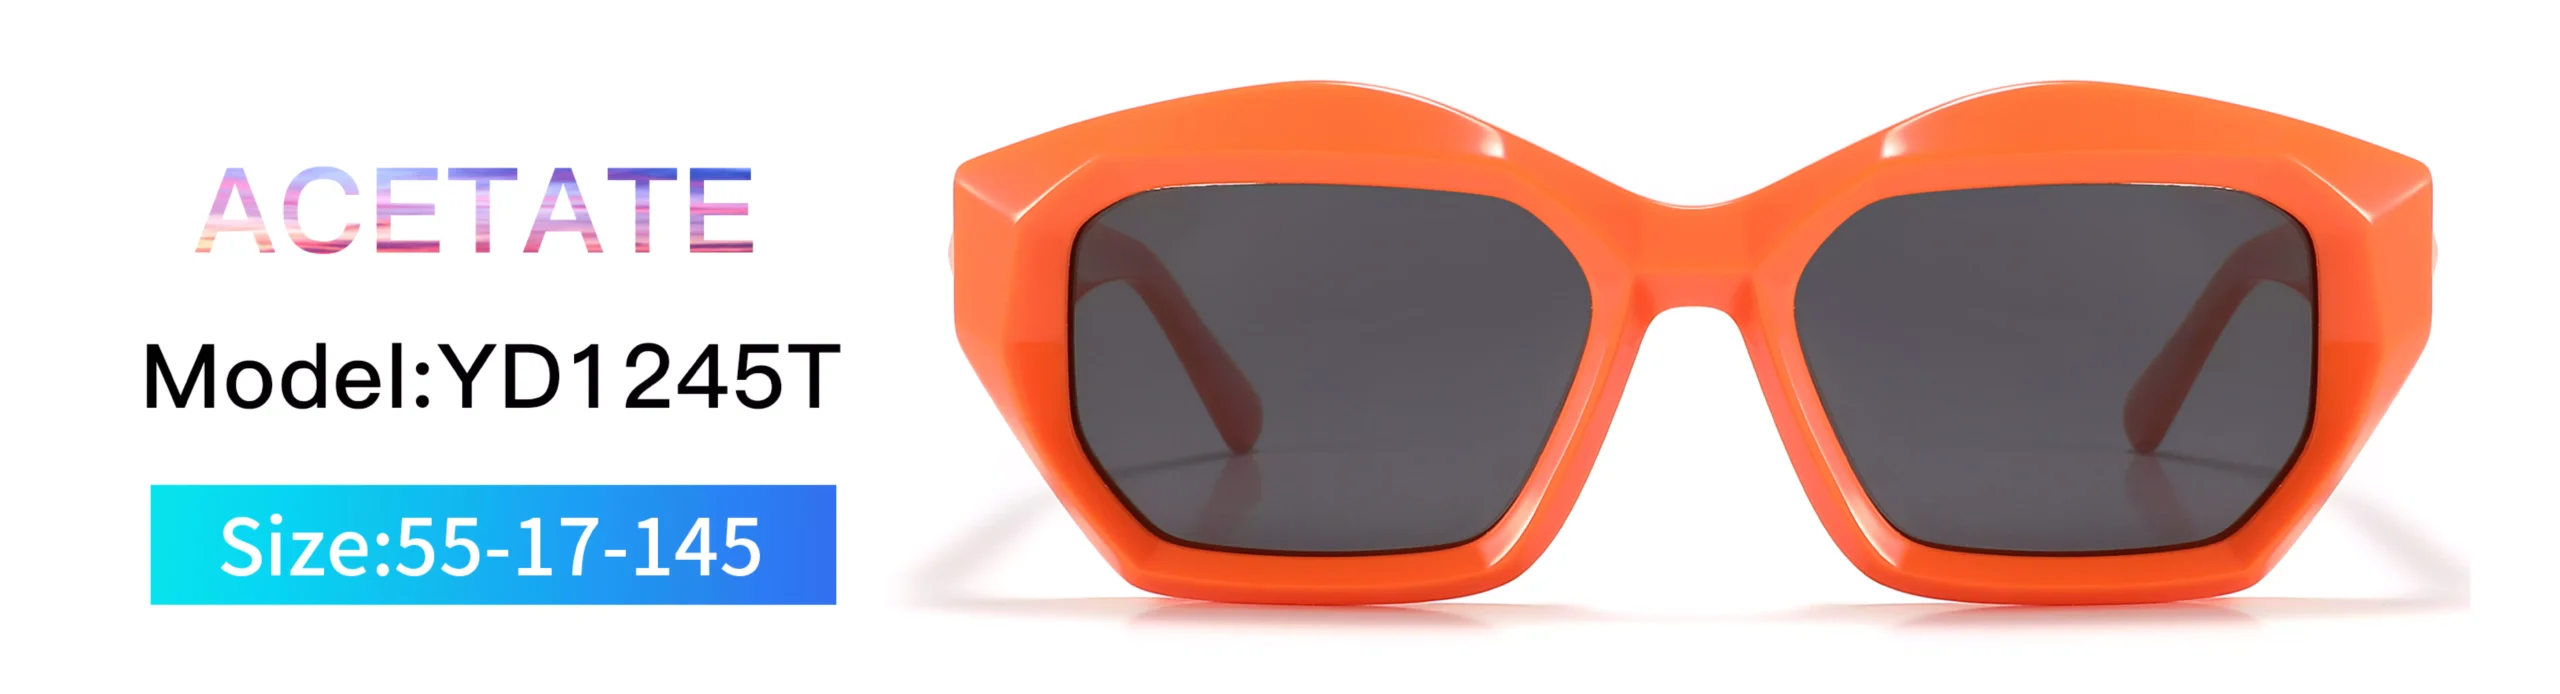 Sunglasses YD1245T Size Model, front display, thick frame,orange